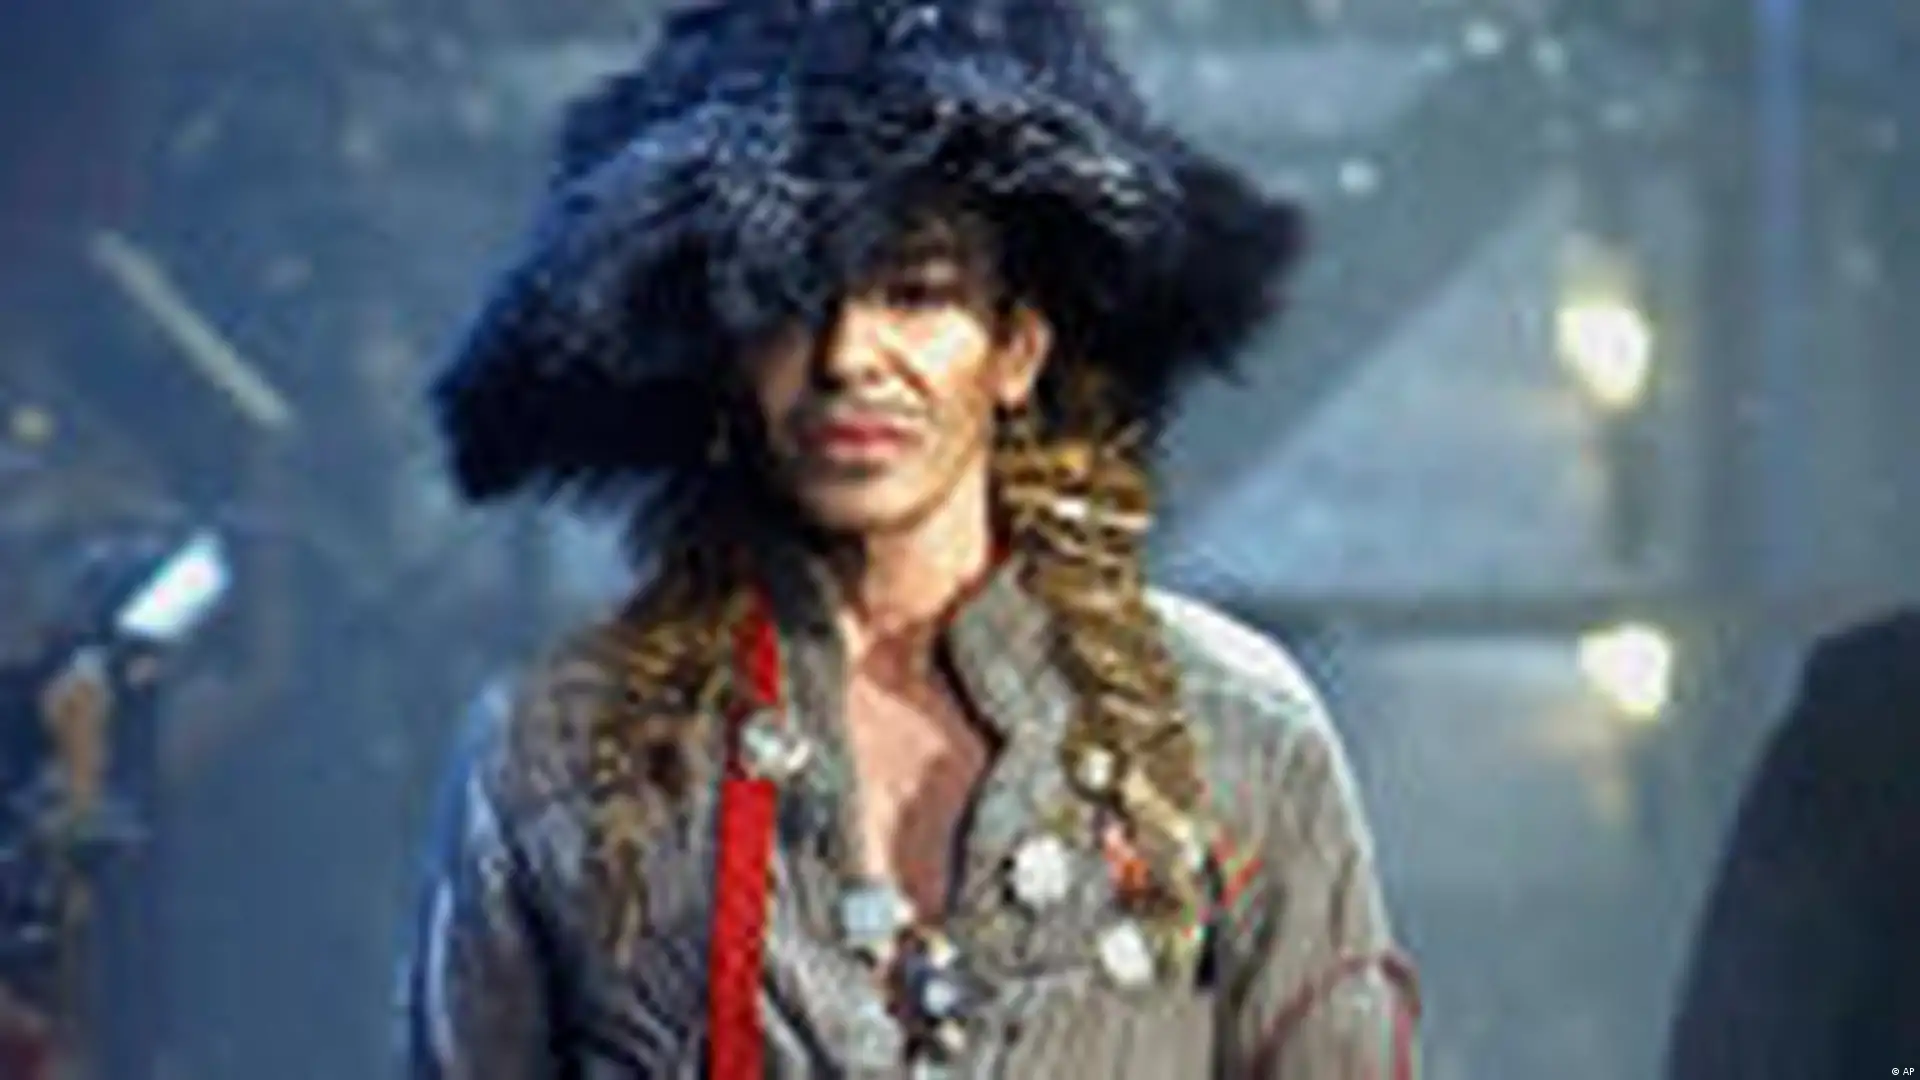 John Galliano sacked by Christian Dior over alleged antisemitic rant, Fashion